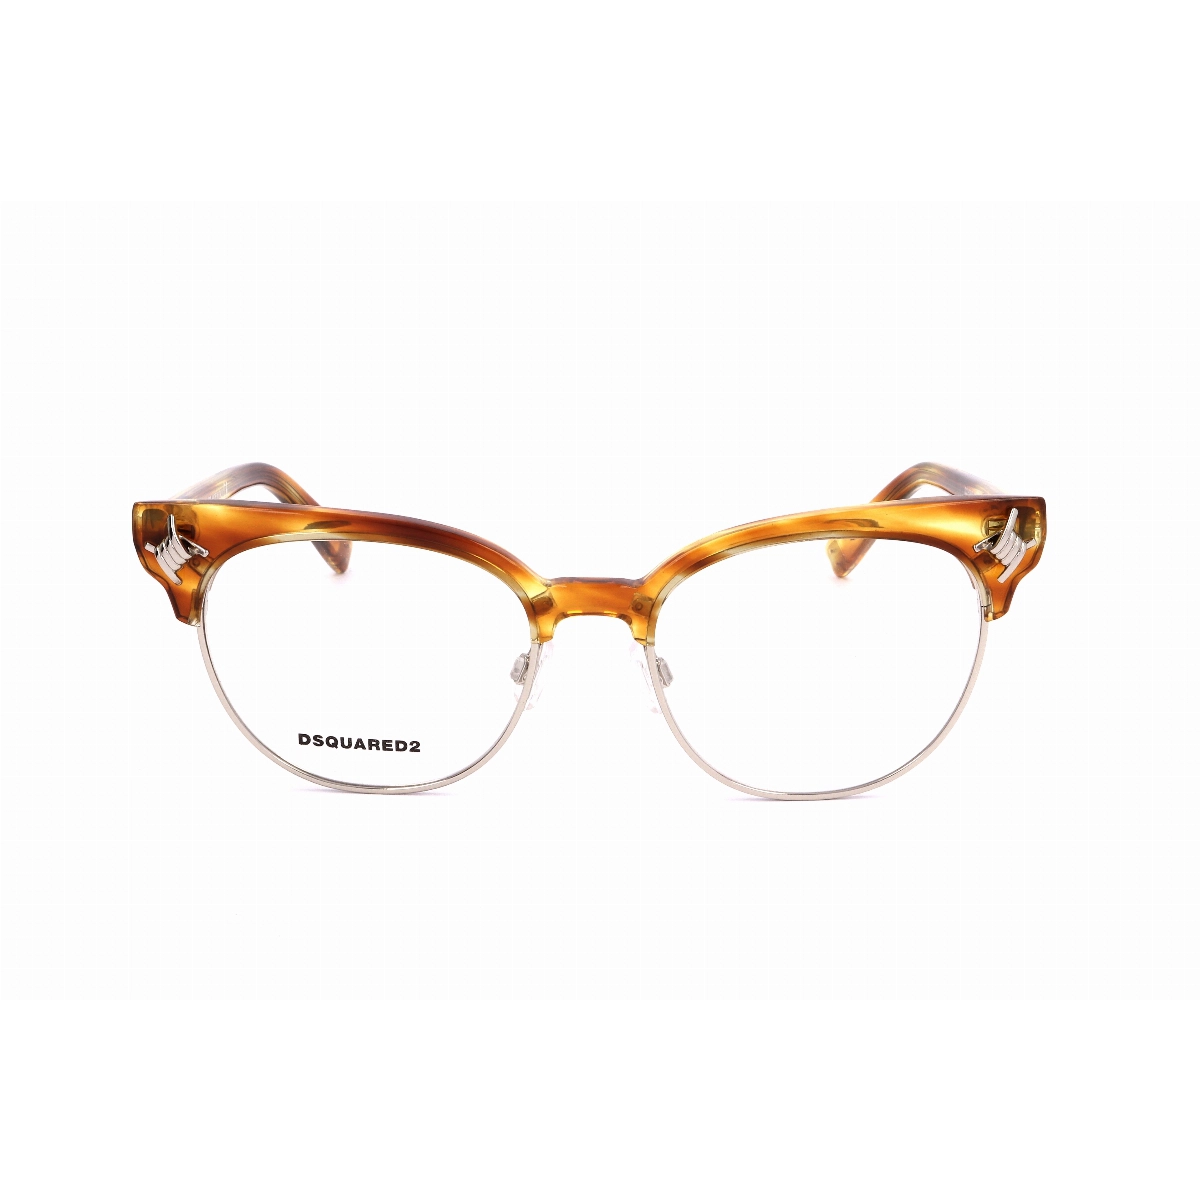 GAFAS DE MUJER DSQUARED2 DQ5207-047 DQ5207047